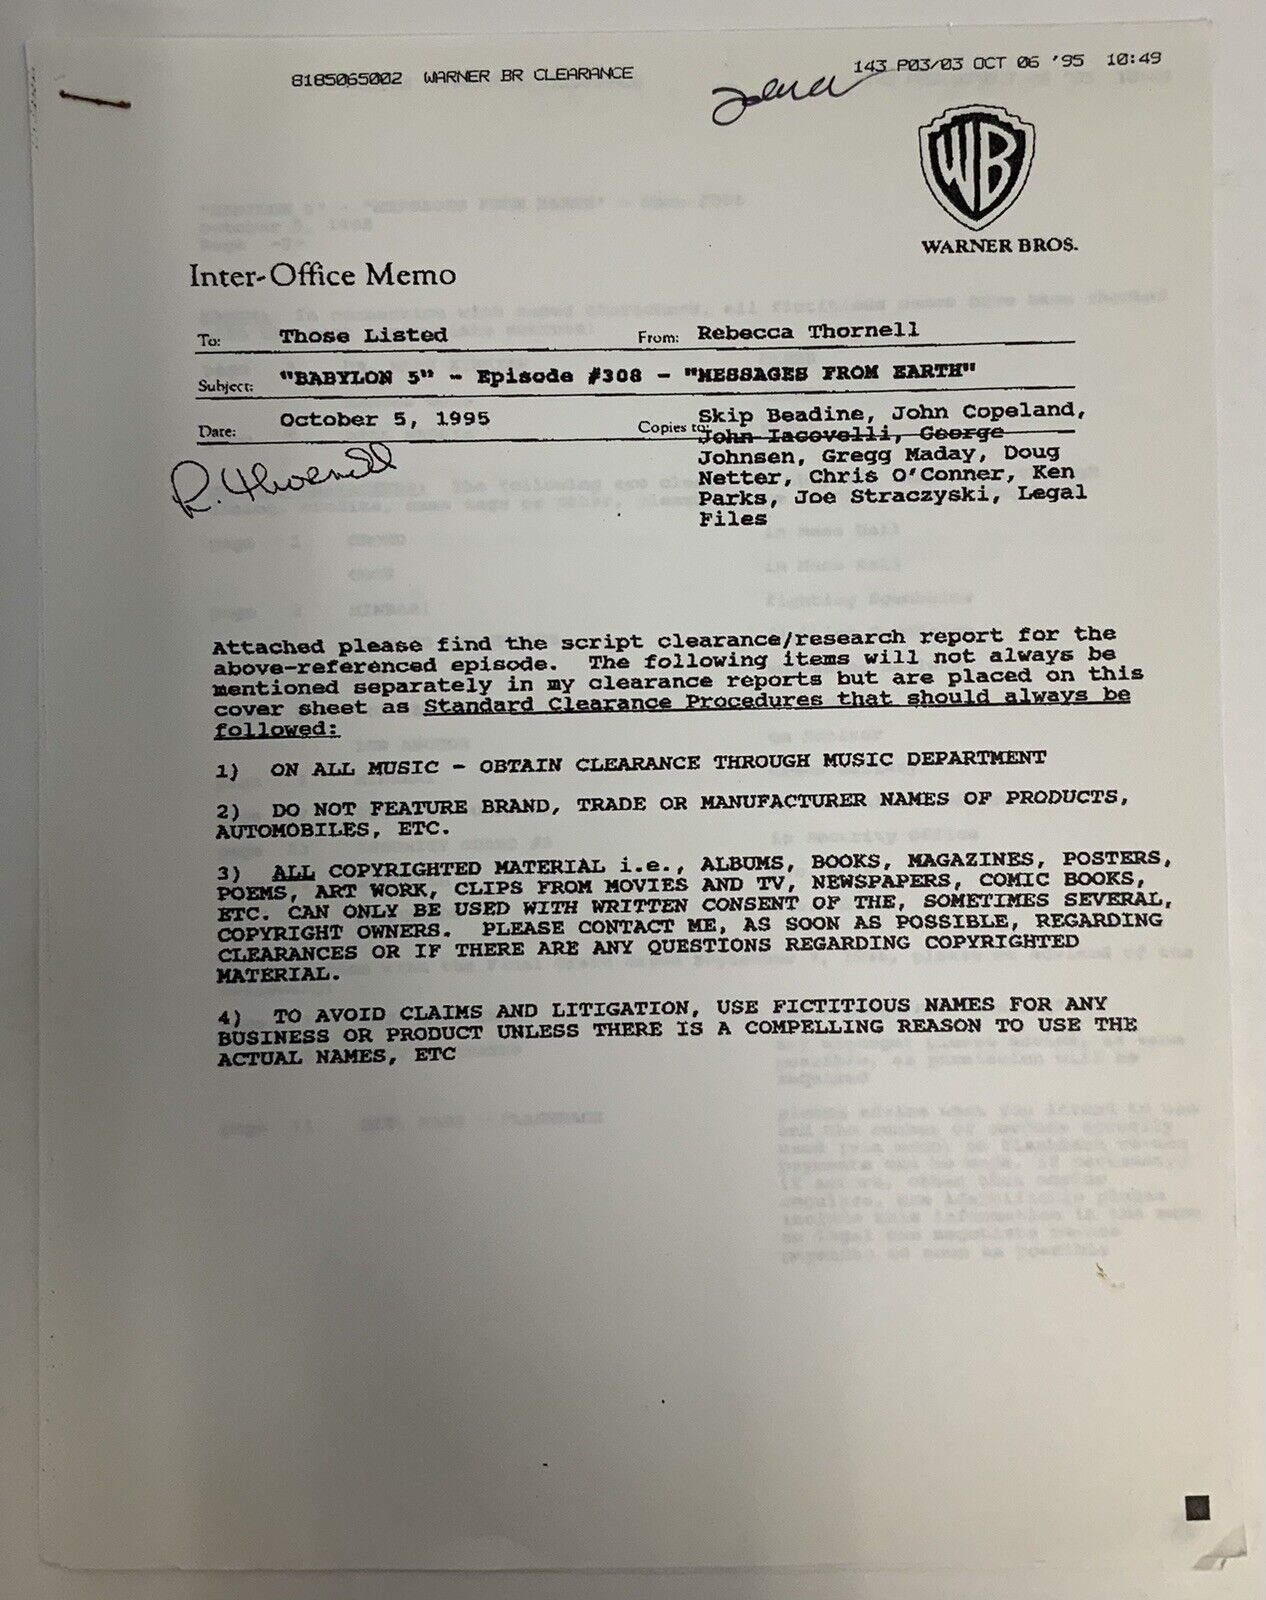 Babylon 5 Episode # 308 Message From Earth Signed Inter Office Memo 2 Pages